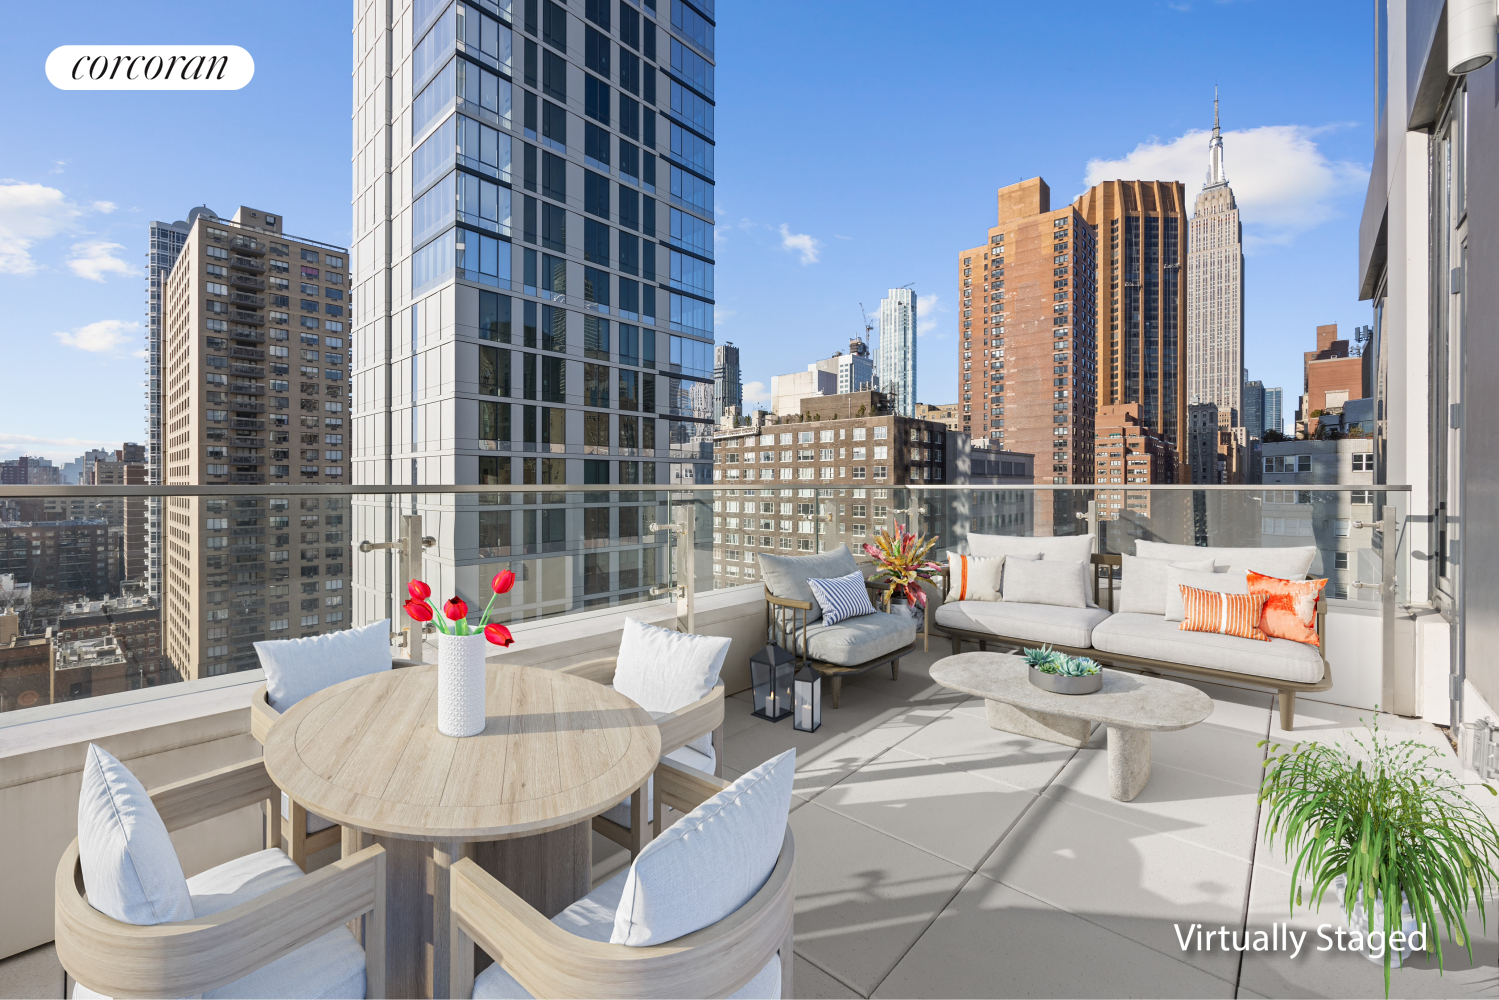 509 3rd Avenue 10E, Murray Hill, Midtown East, NYC - 2 Bedrooms  
1 Bathrooms  
4 Rooms - 